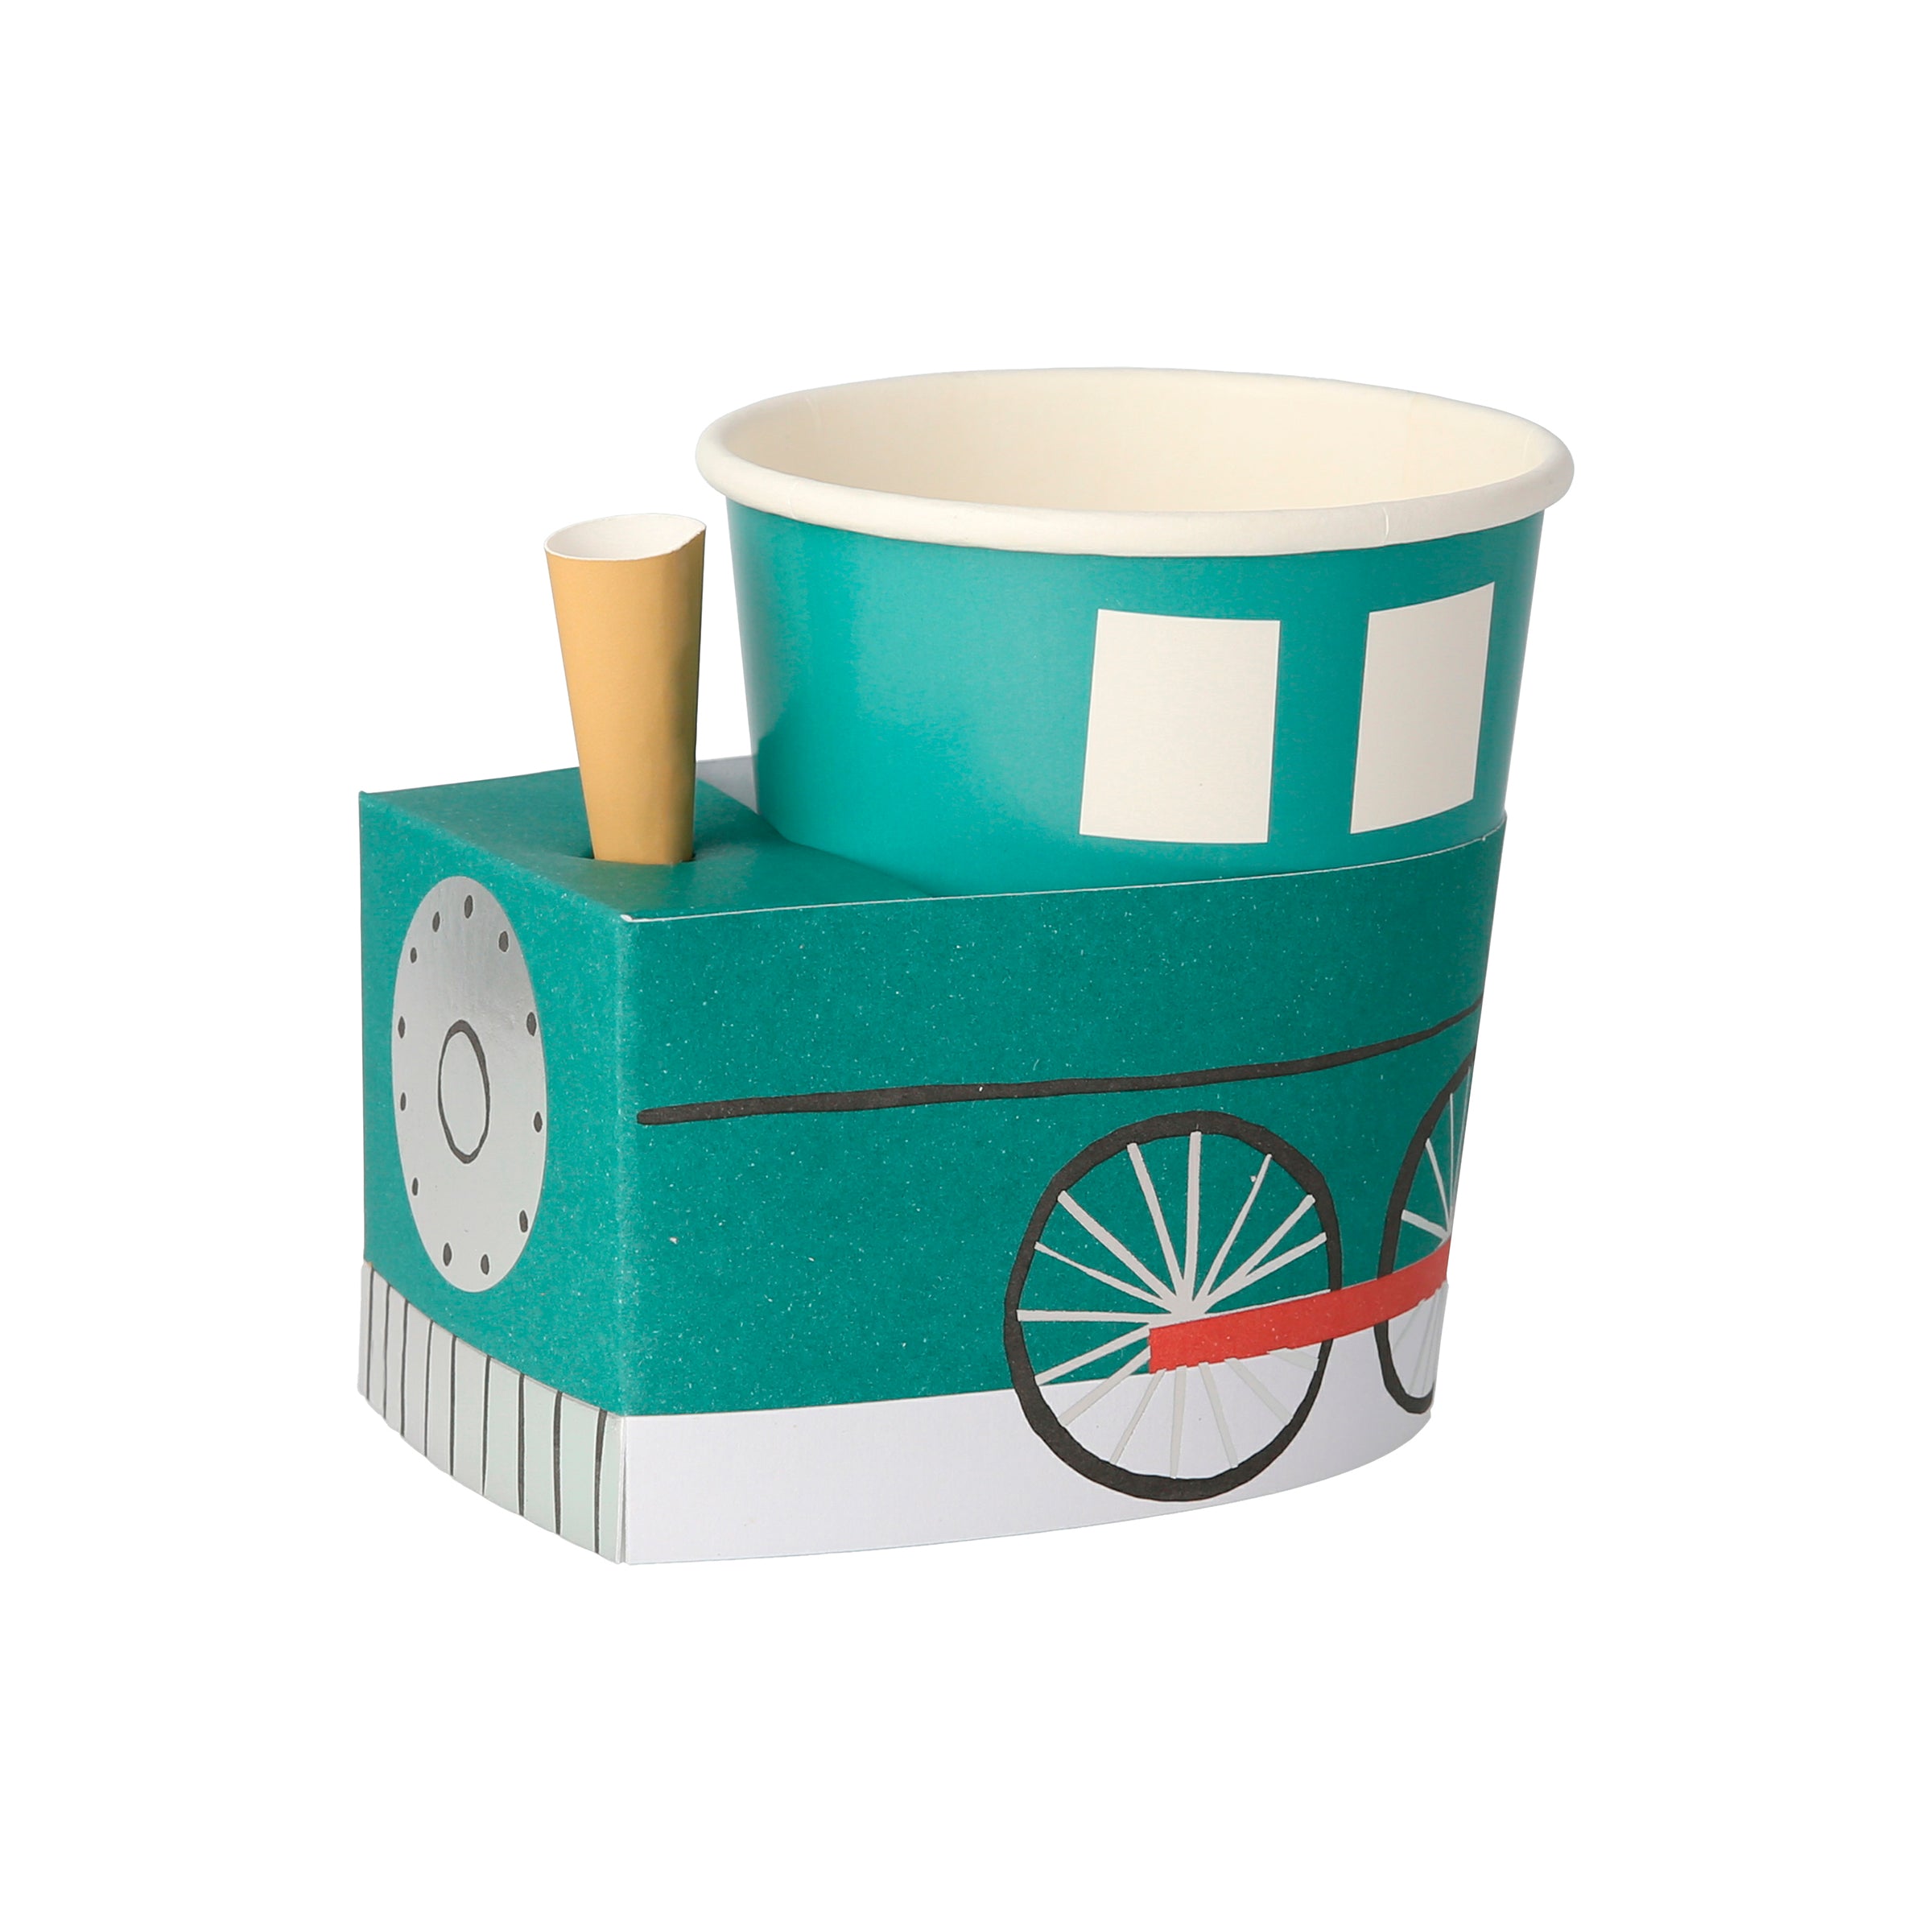 Our paper cups, in the shapes of trains, are ideal for a train party.